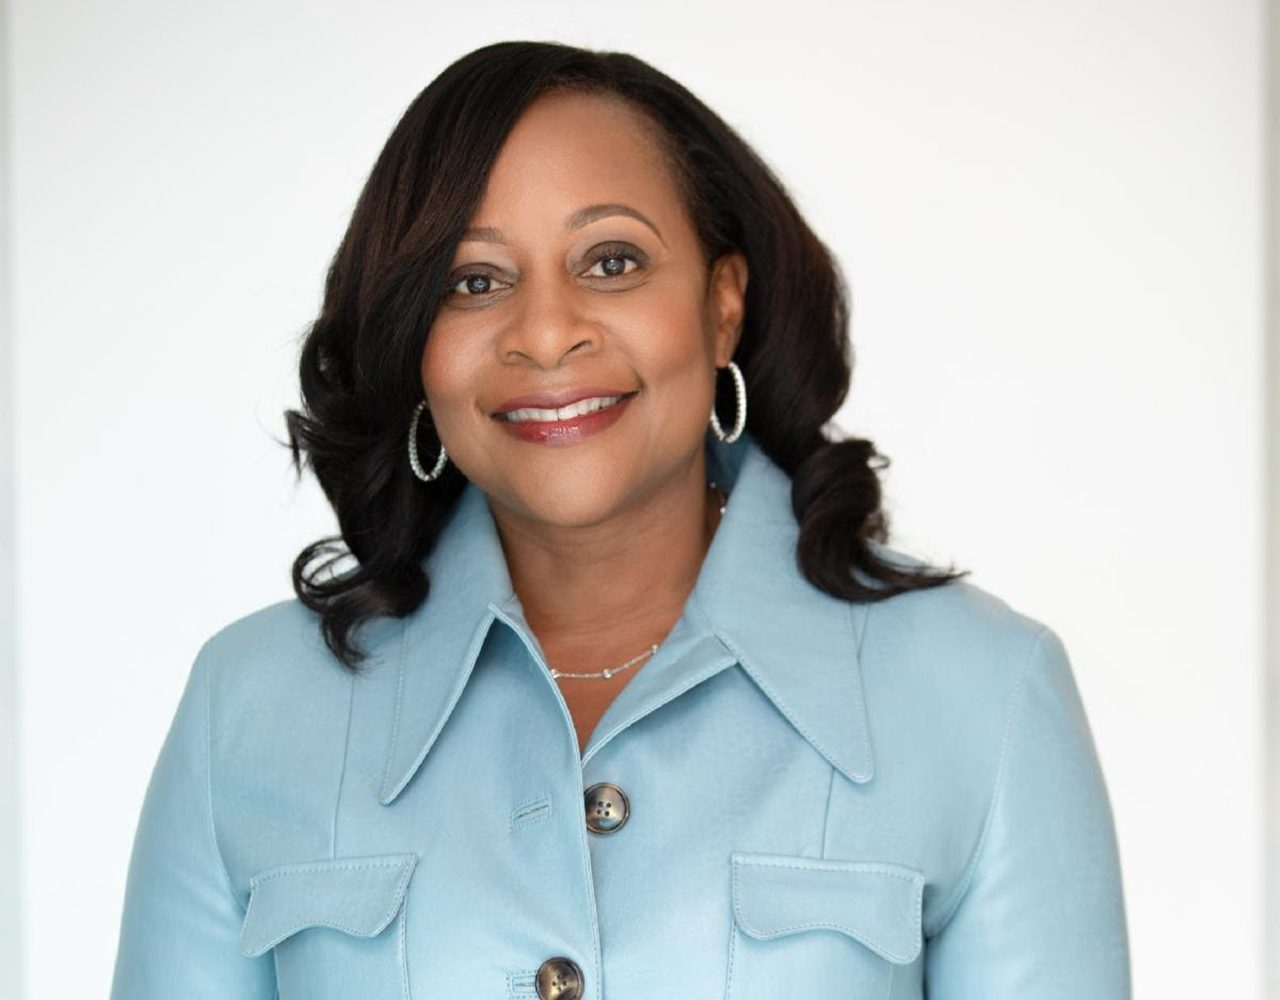 Mastercard Foundation Appoints Robin Washington to Board of Directors